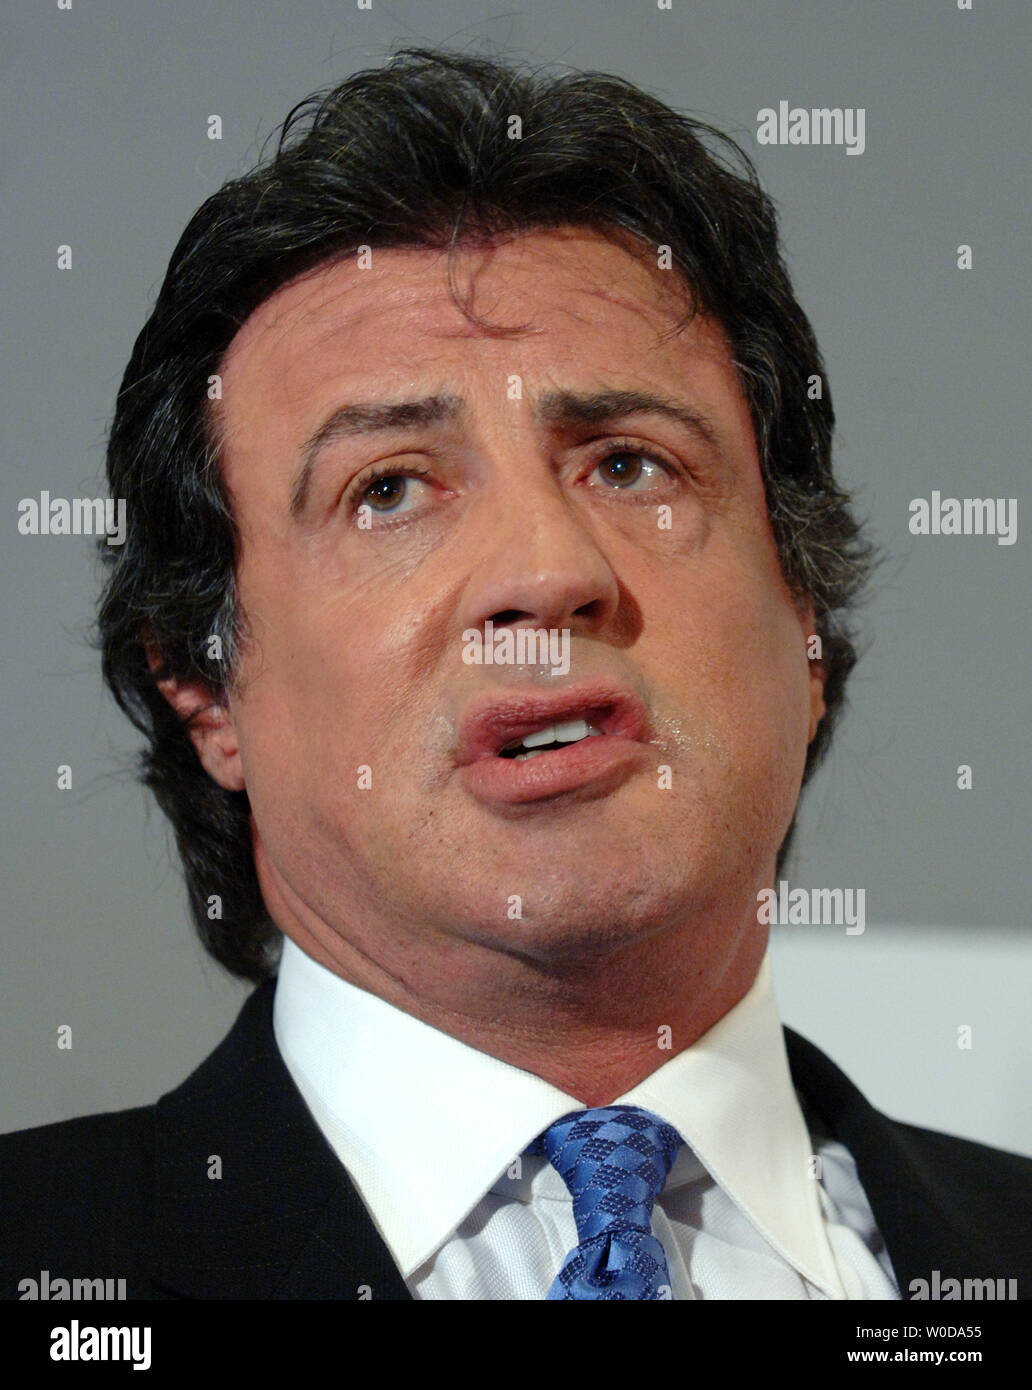 Actor and filmmaker Sylvester Stallone speaks before donating objects from the Academy Award-winning 'Rocky' films to The Smithsonian National Museum of American History in Washington on December 5, 2006.   (UPI Photo/Roger L. Wollenberg) Stock Photo